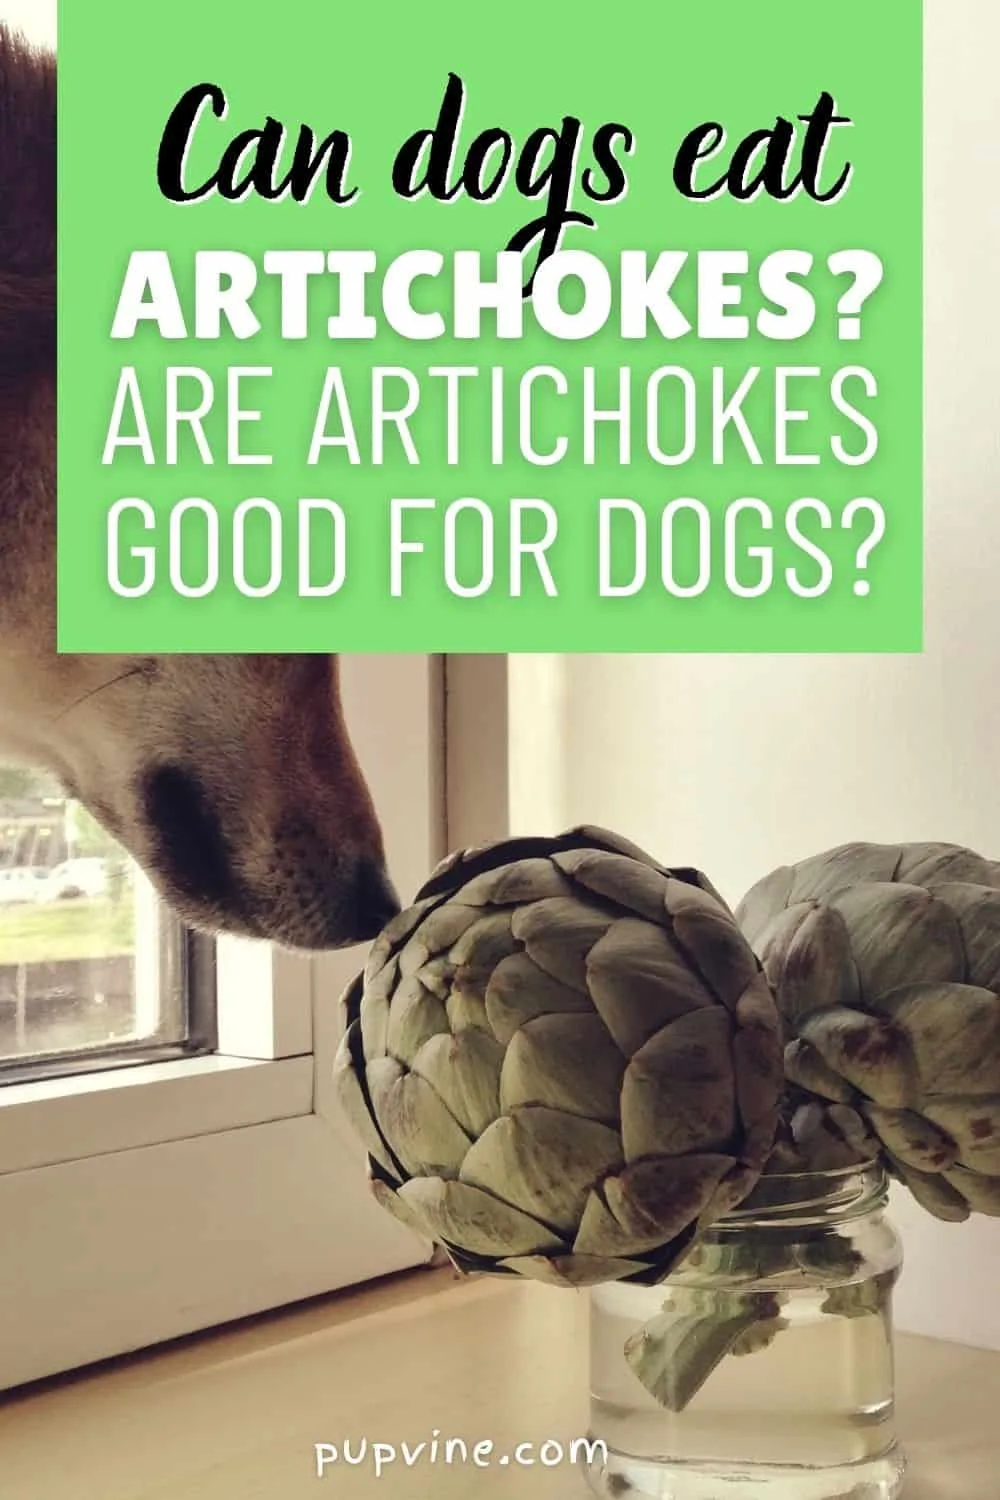 Can Dogs Eat Artichokes? Are Artichokes Good for Dogs?